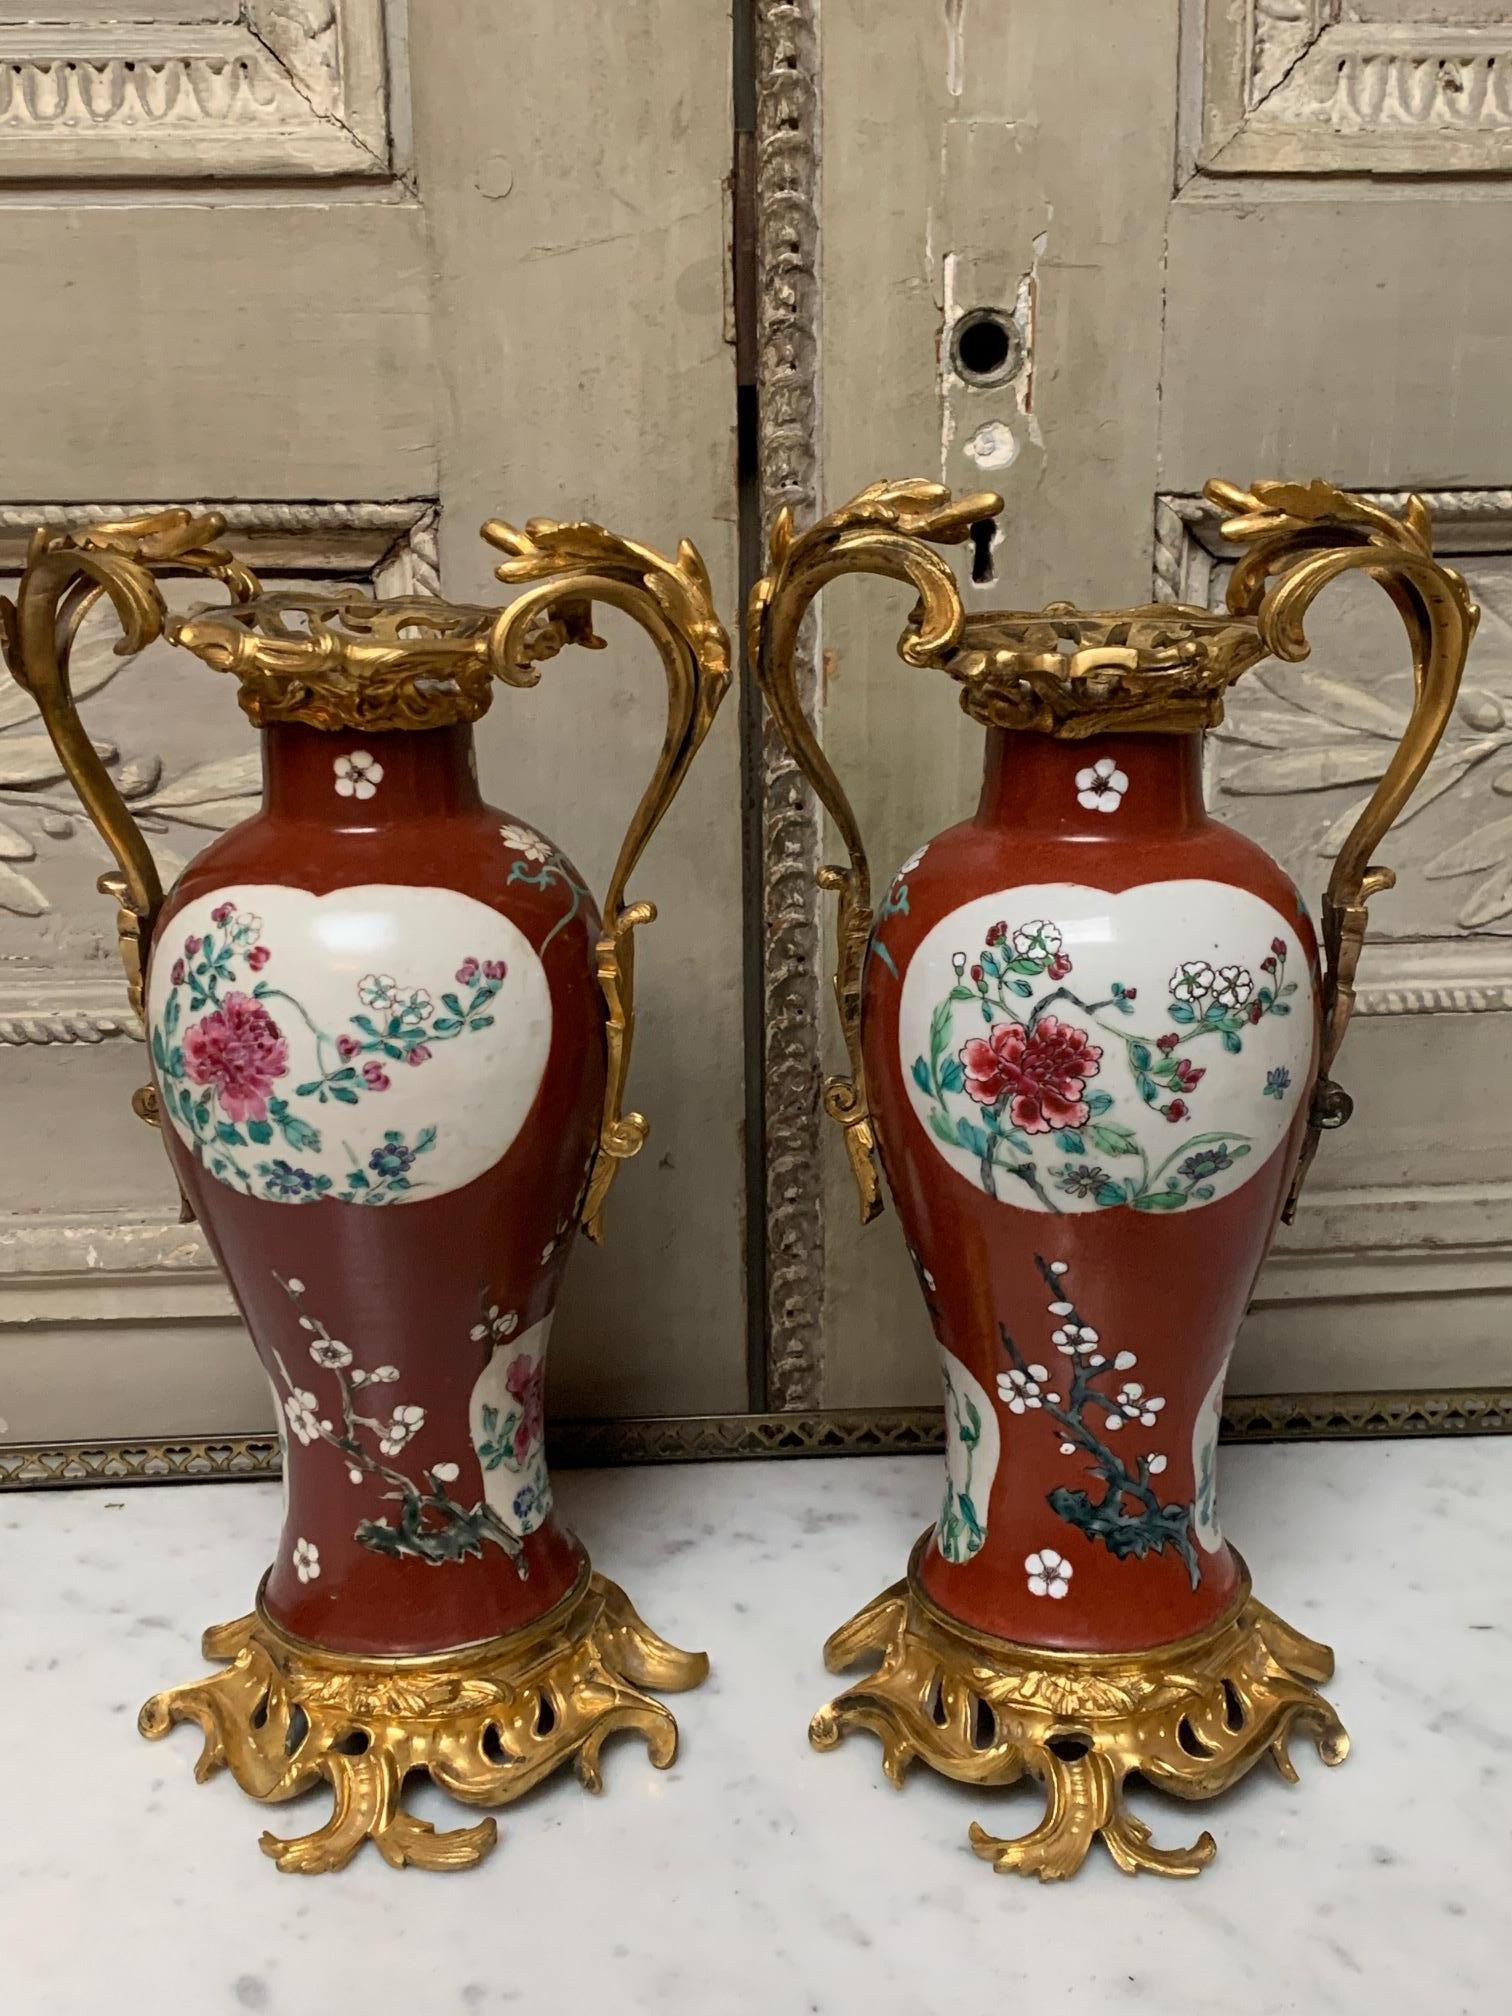 A pair of red Chinese export porcelain ovoid vases probably Qianlong period, with later 19th century Parisian French Louis XV style gilt bronze mounts.

The chinoiserie style was extremely influential in European decorative art at the time this